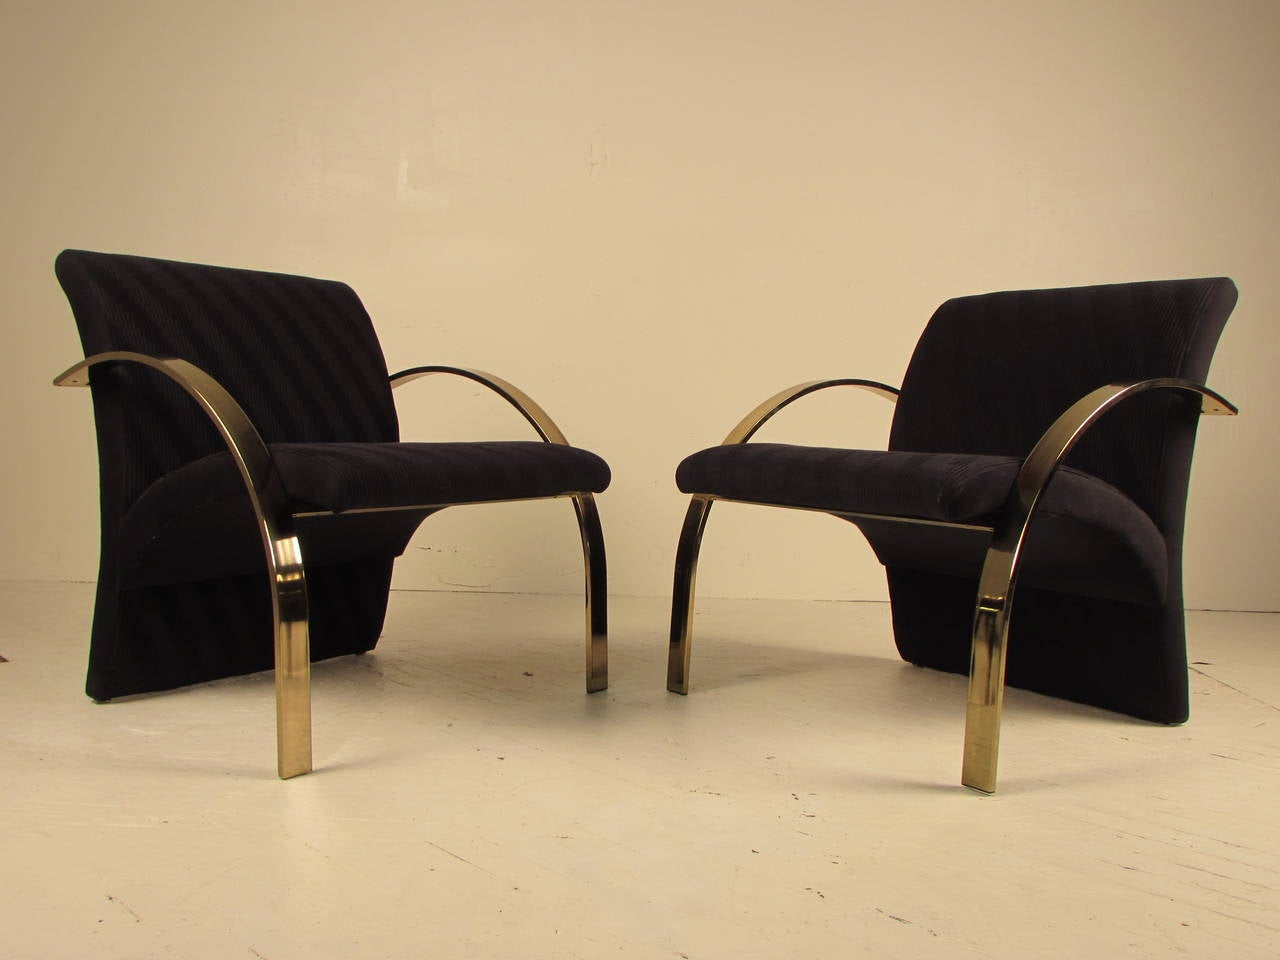 Stunning, highly sculptural brass armchairs or lounge chairs made by Directional. Fabric is a wool blend with a ruched diagonal stripe in a very, very dark midnight blue that reads black in some lighting.

Brass is in exceptional vintage condition